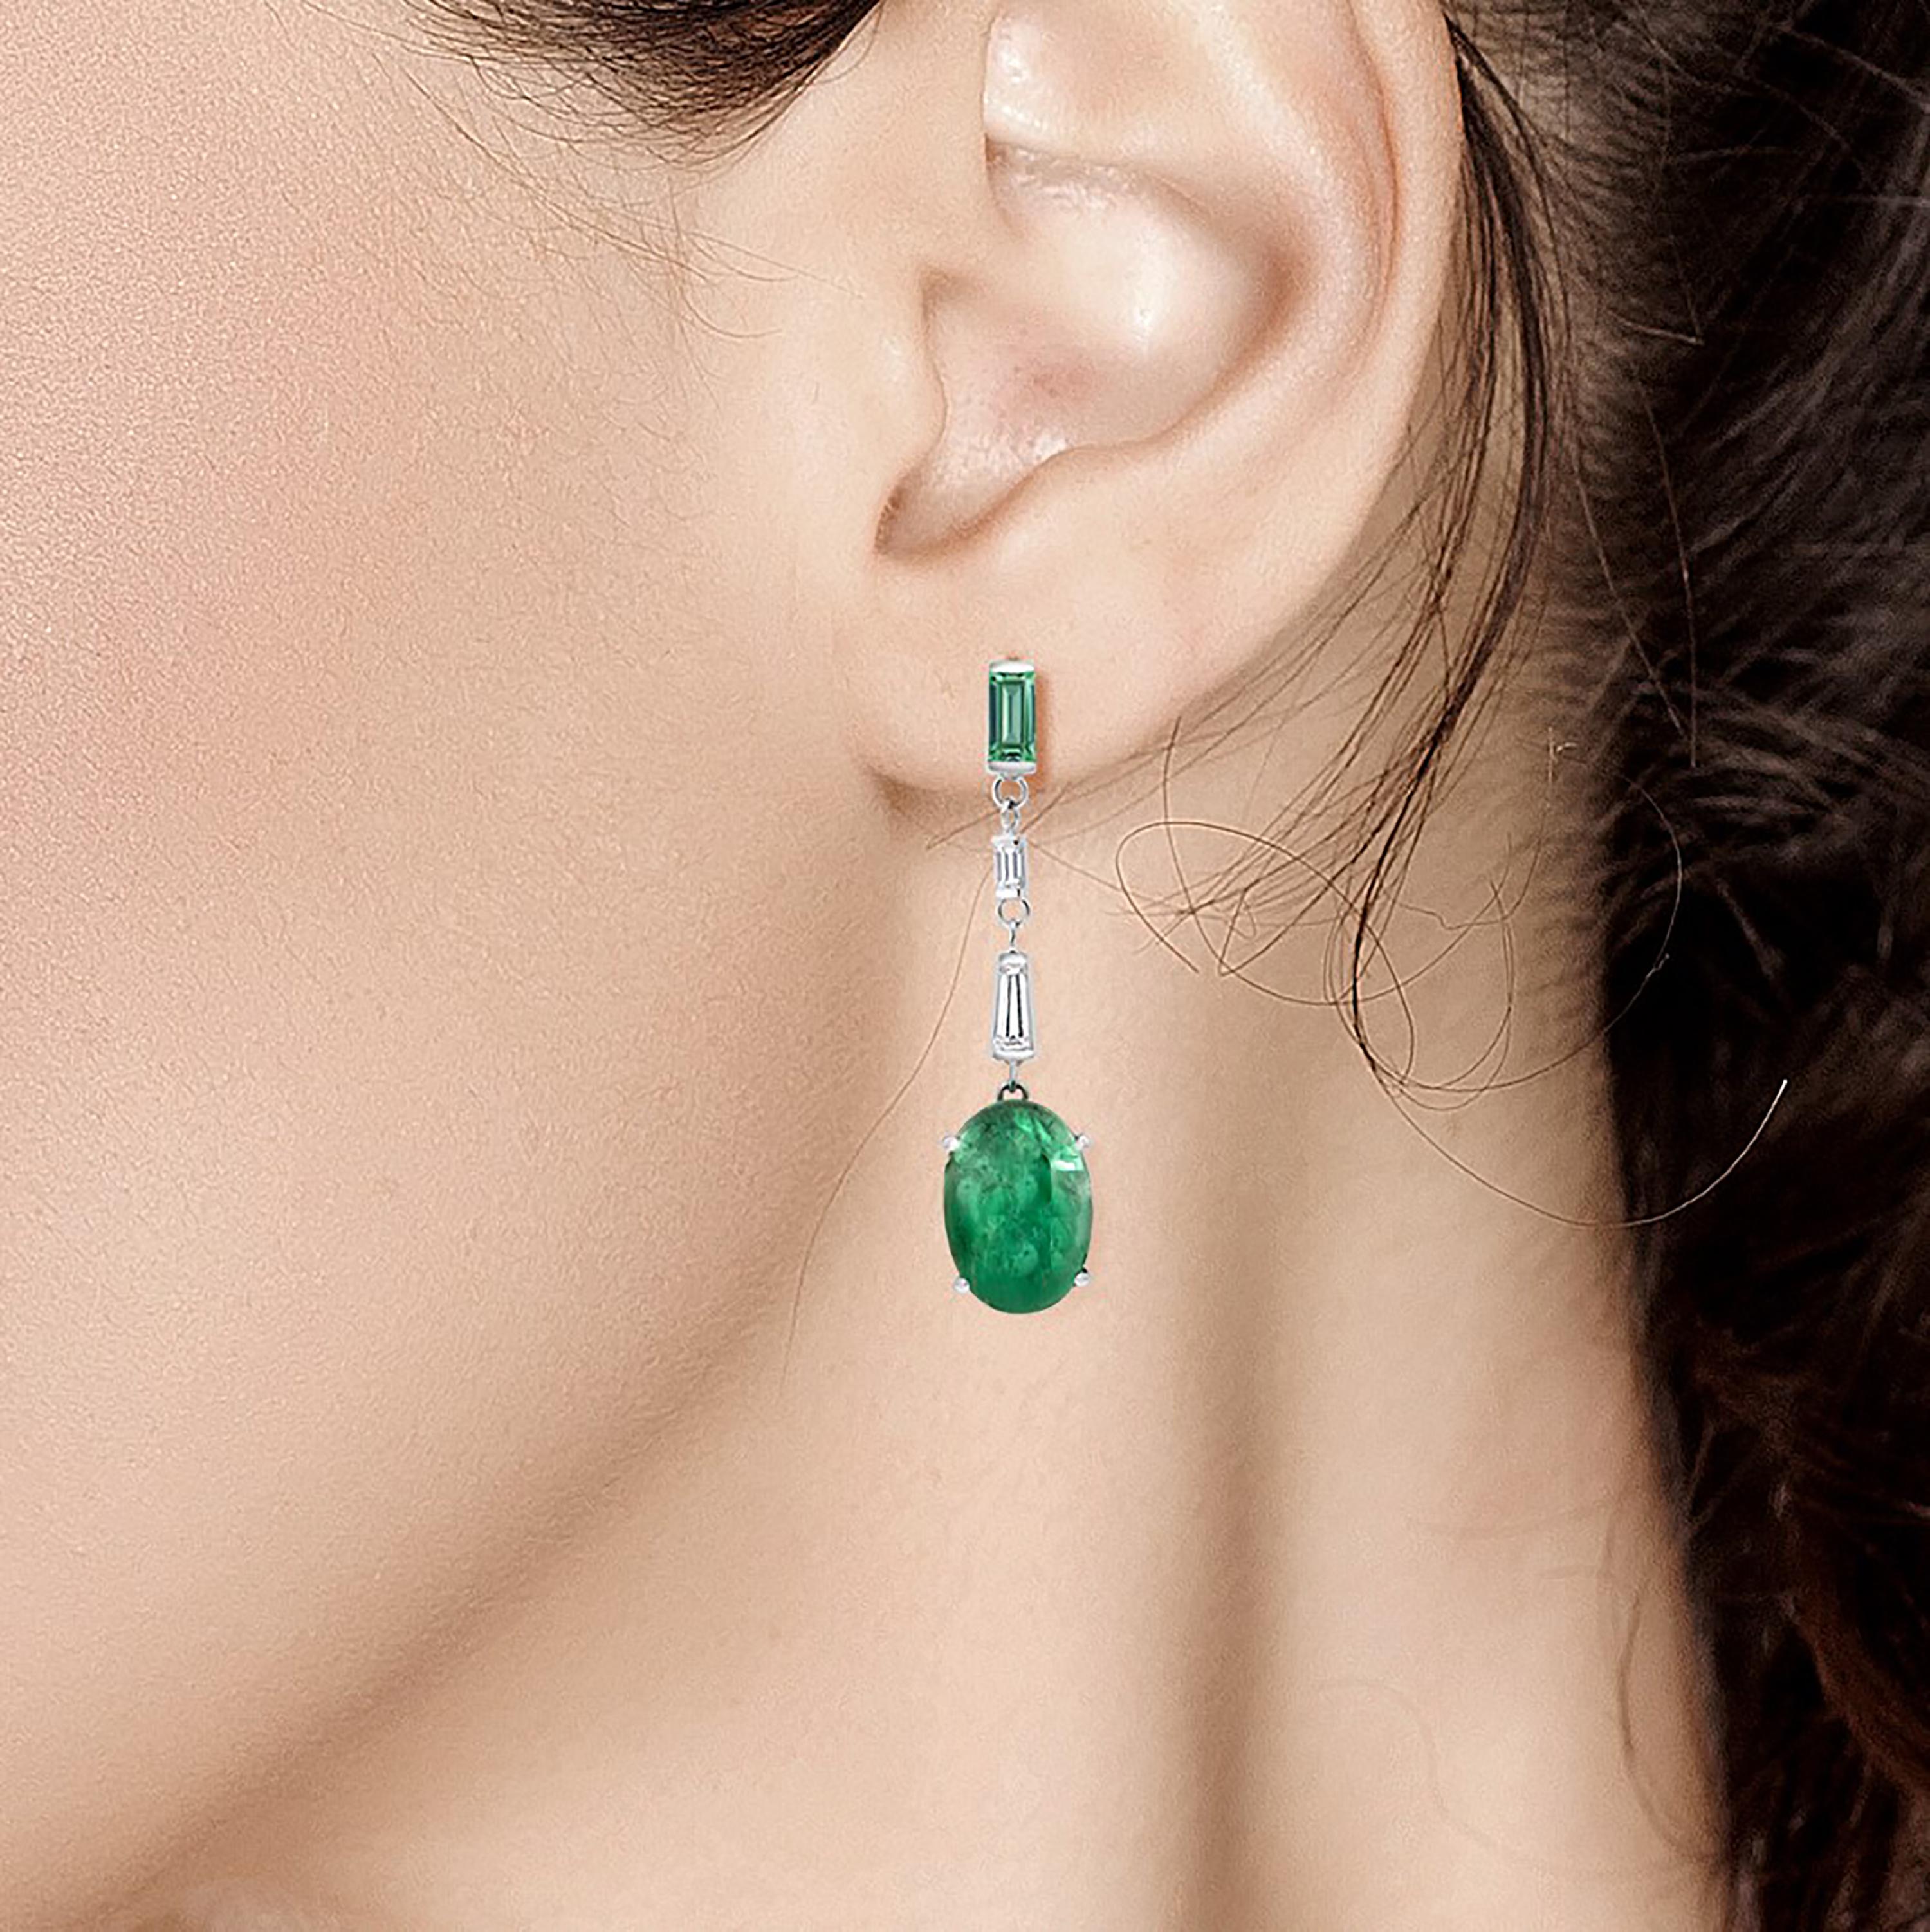 Contemporary Cabochon Emerald Baguette Diamond White Gold Earrings Weighing 15.02 Carat